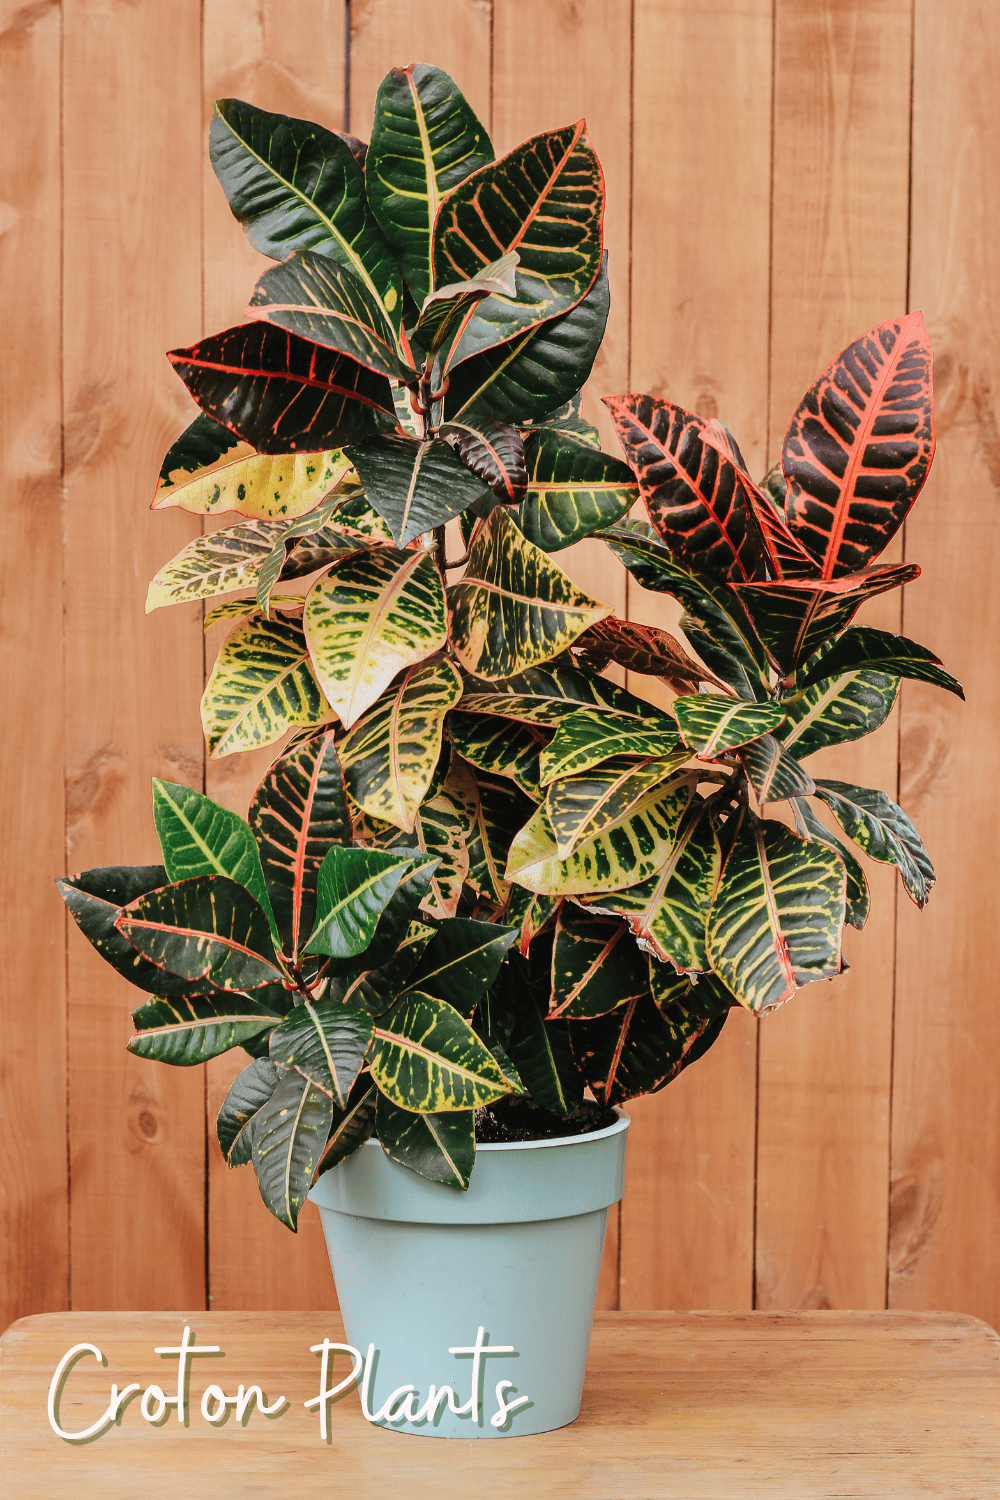 A picture of a croton plant growing in a bathroom.